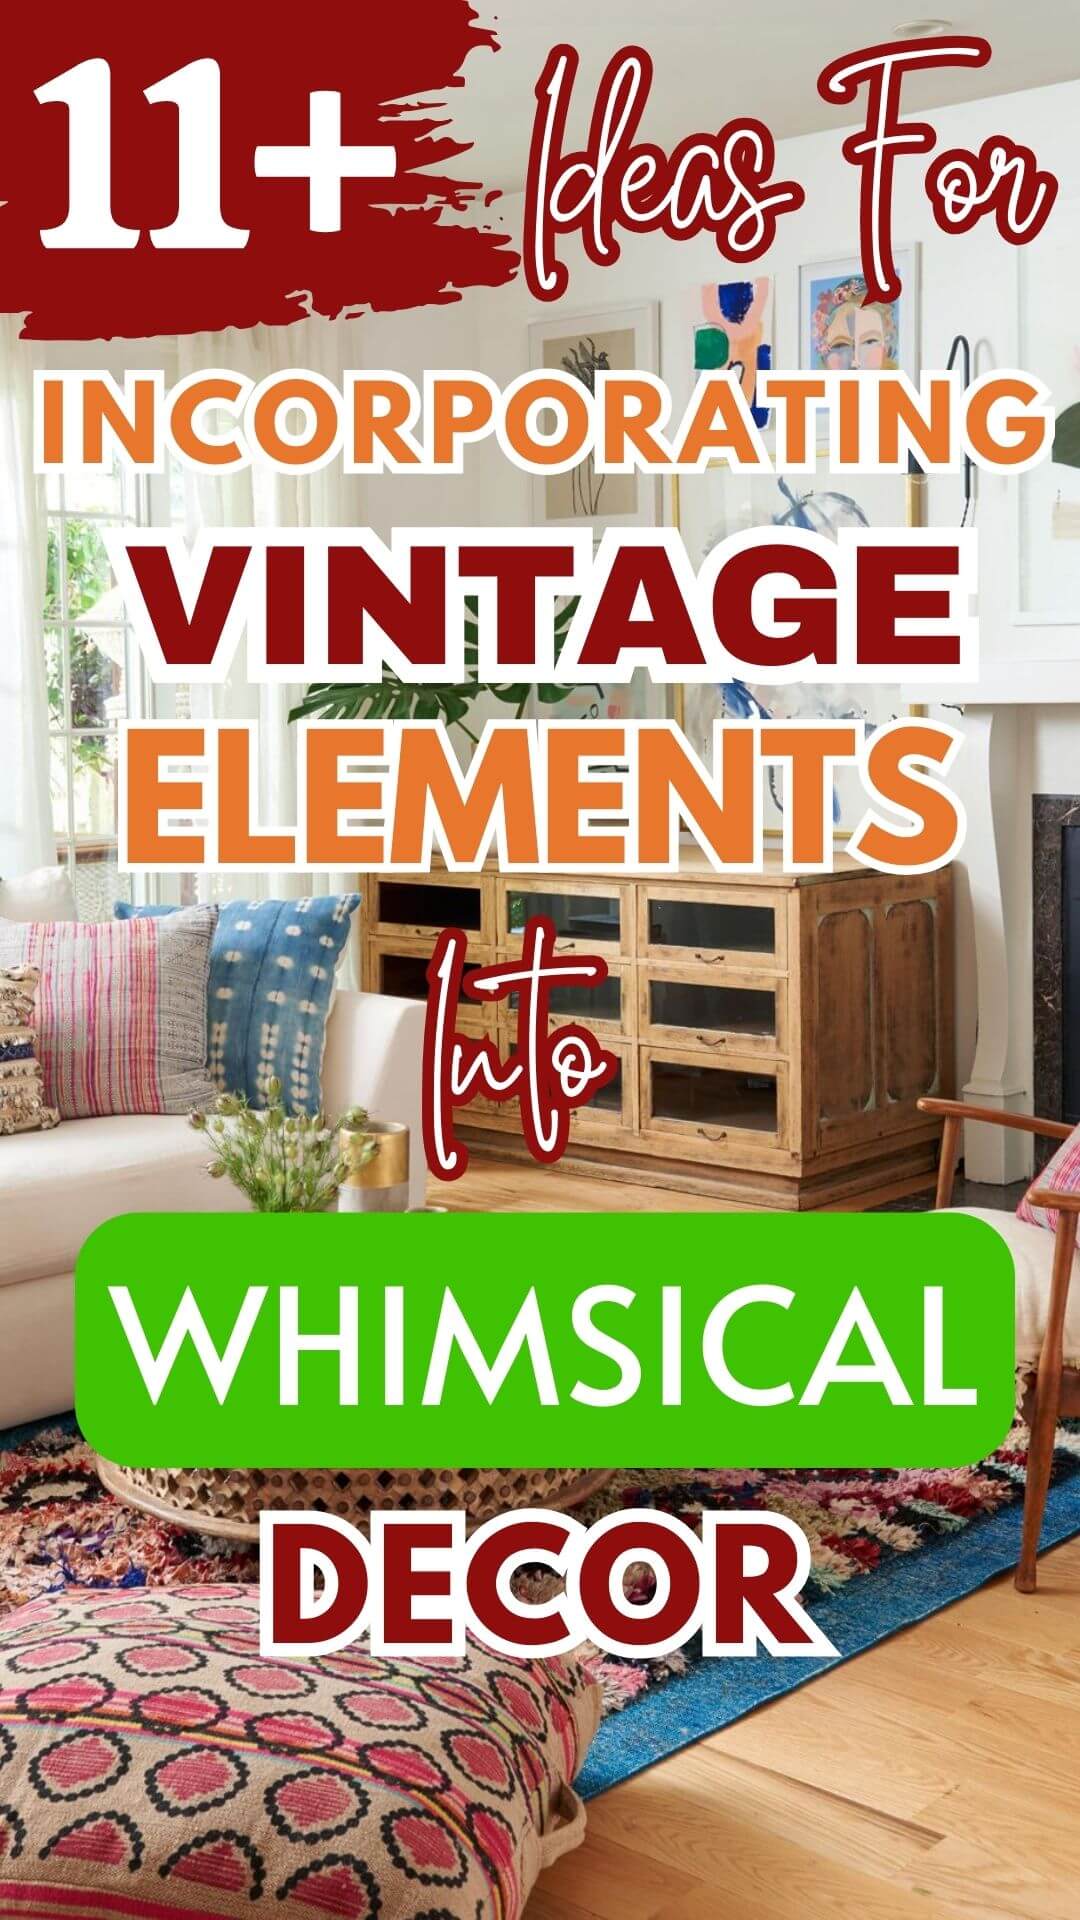 Incorporating Vintage Elements into Whimsical Decor